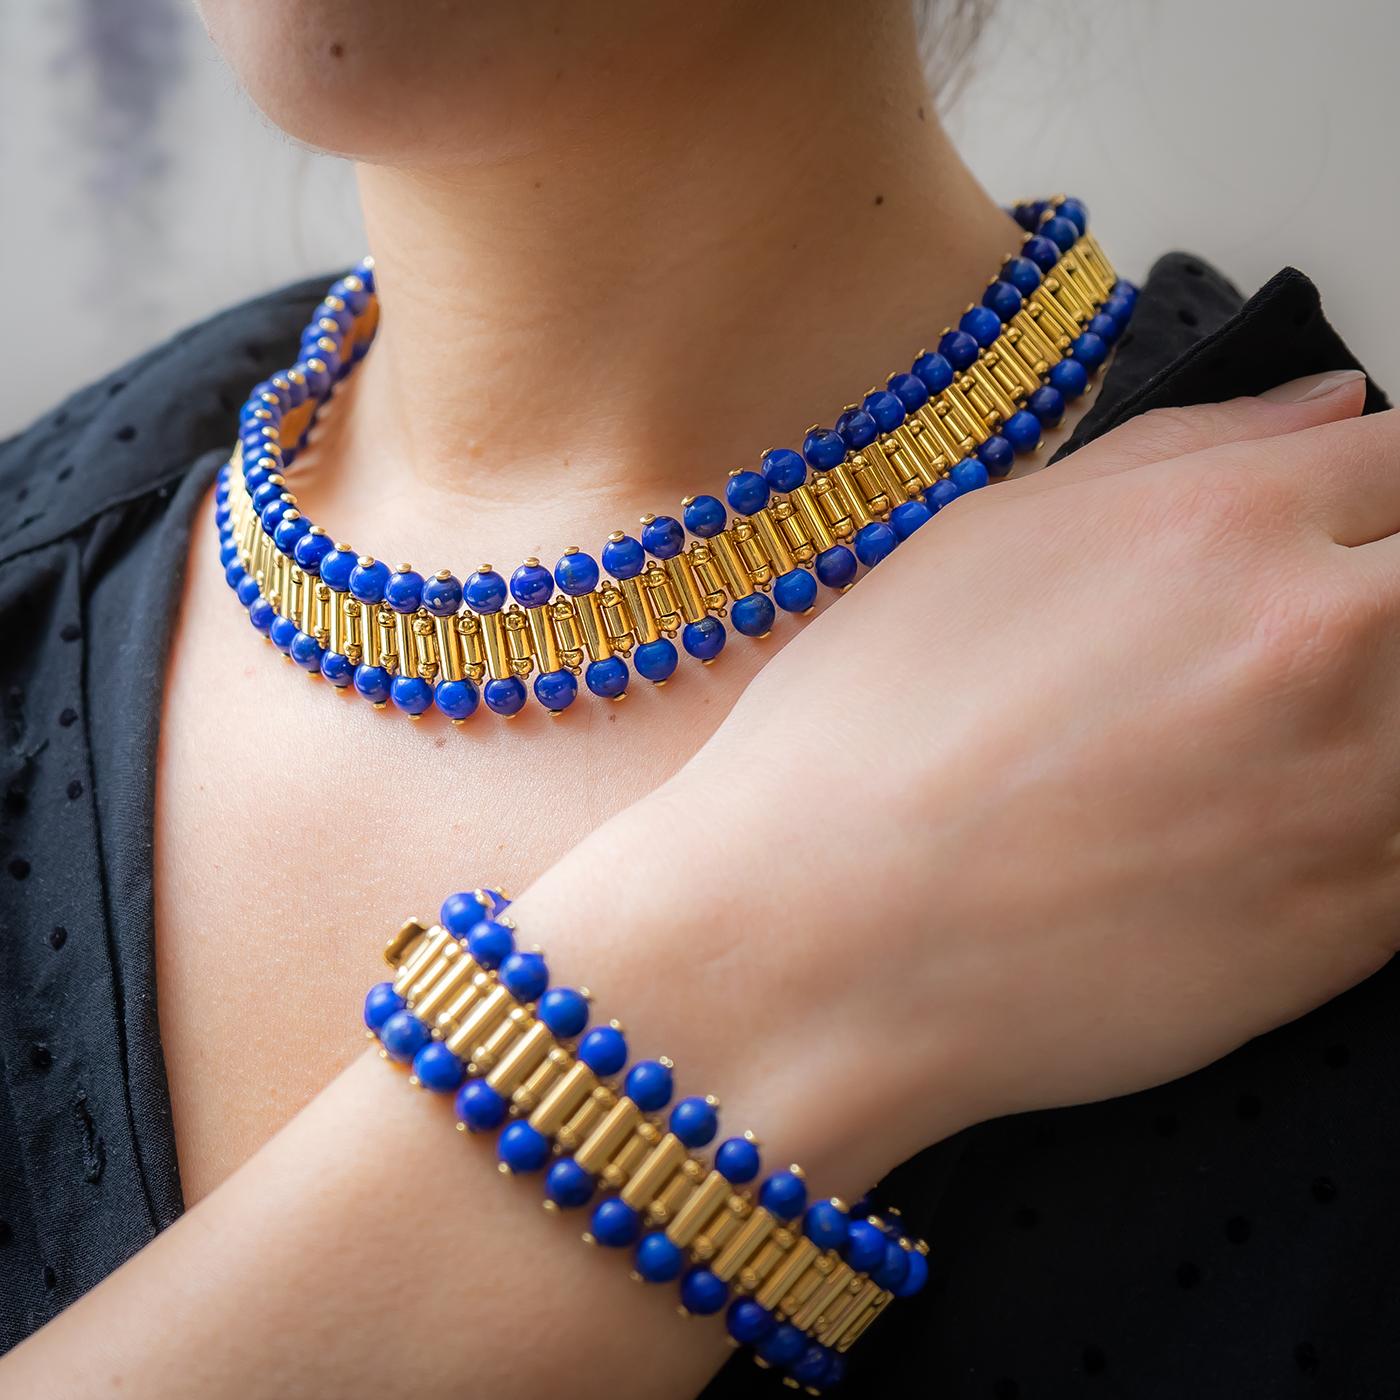 A mid 20th century, French, gold and lapis lazuli bead necklace and bracelet suite with an articulated design of tubular links, with a lapis lazuli bead at each end, mounted in 18ct gold, with French eagle marks.